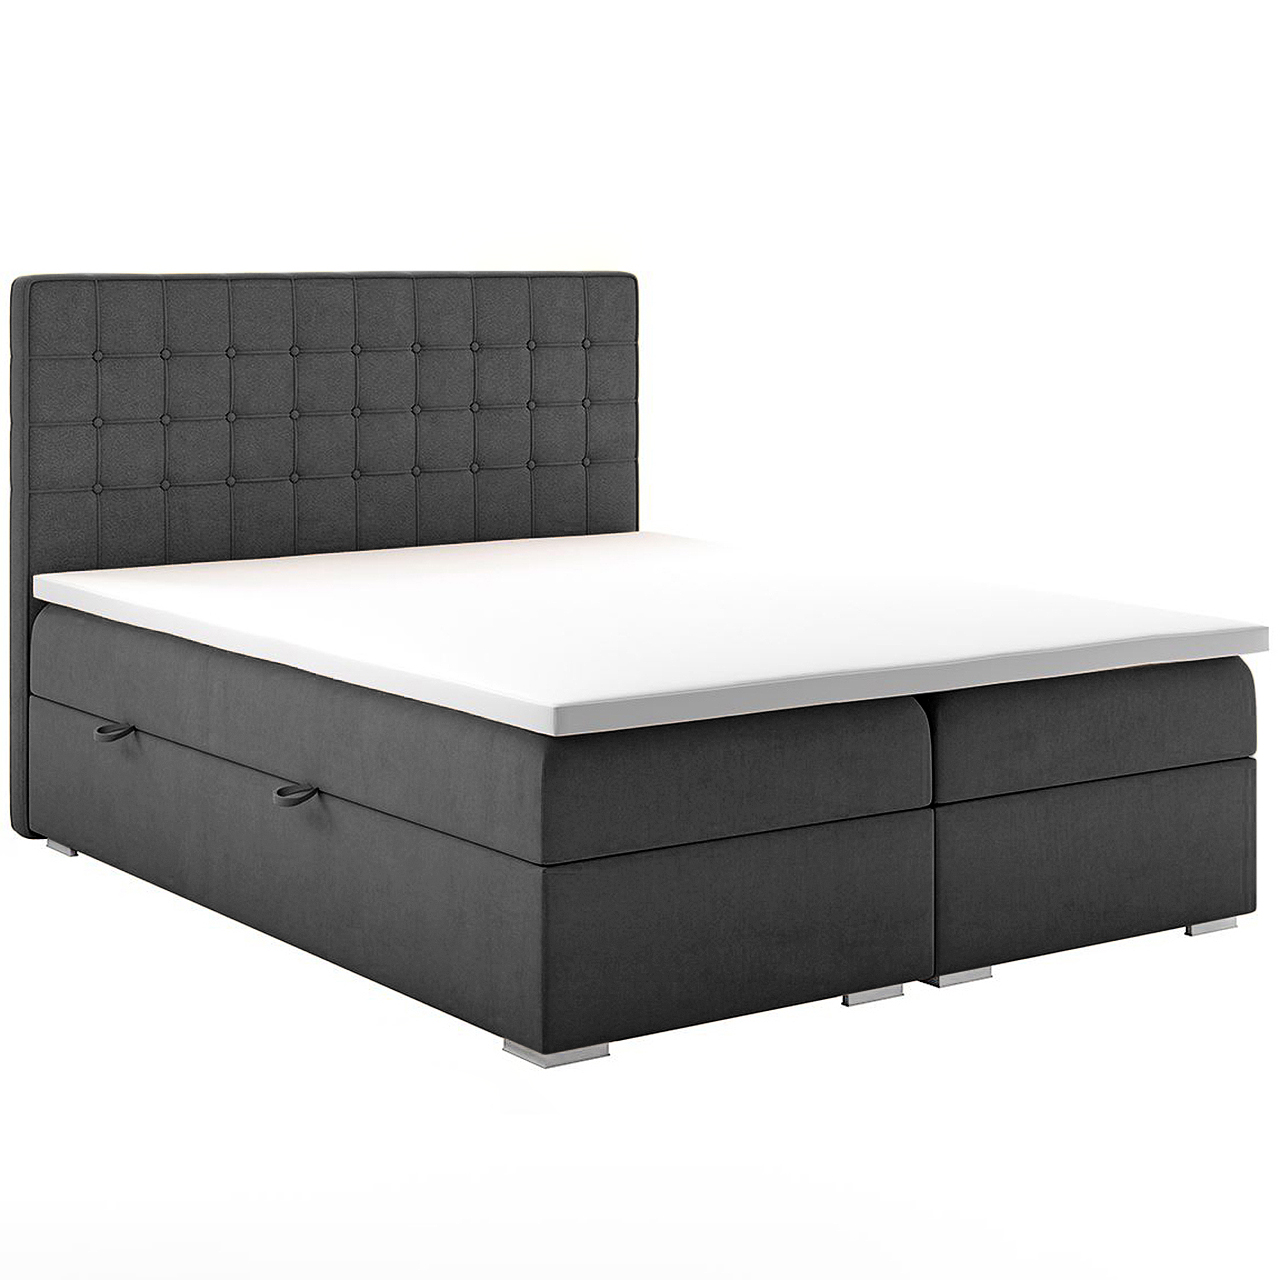 Upholstered bed CARLOS 180x200 monolith 92